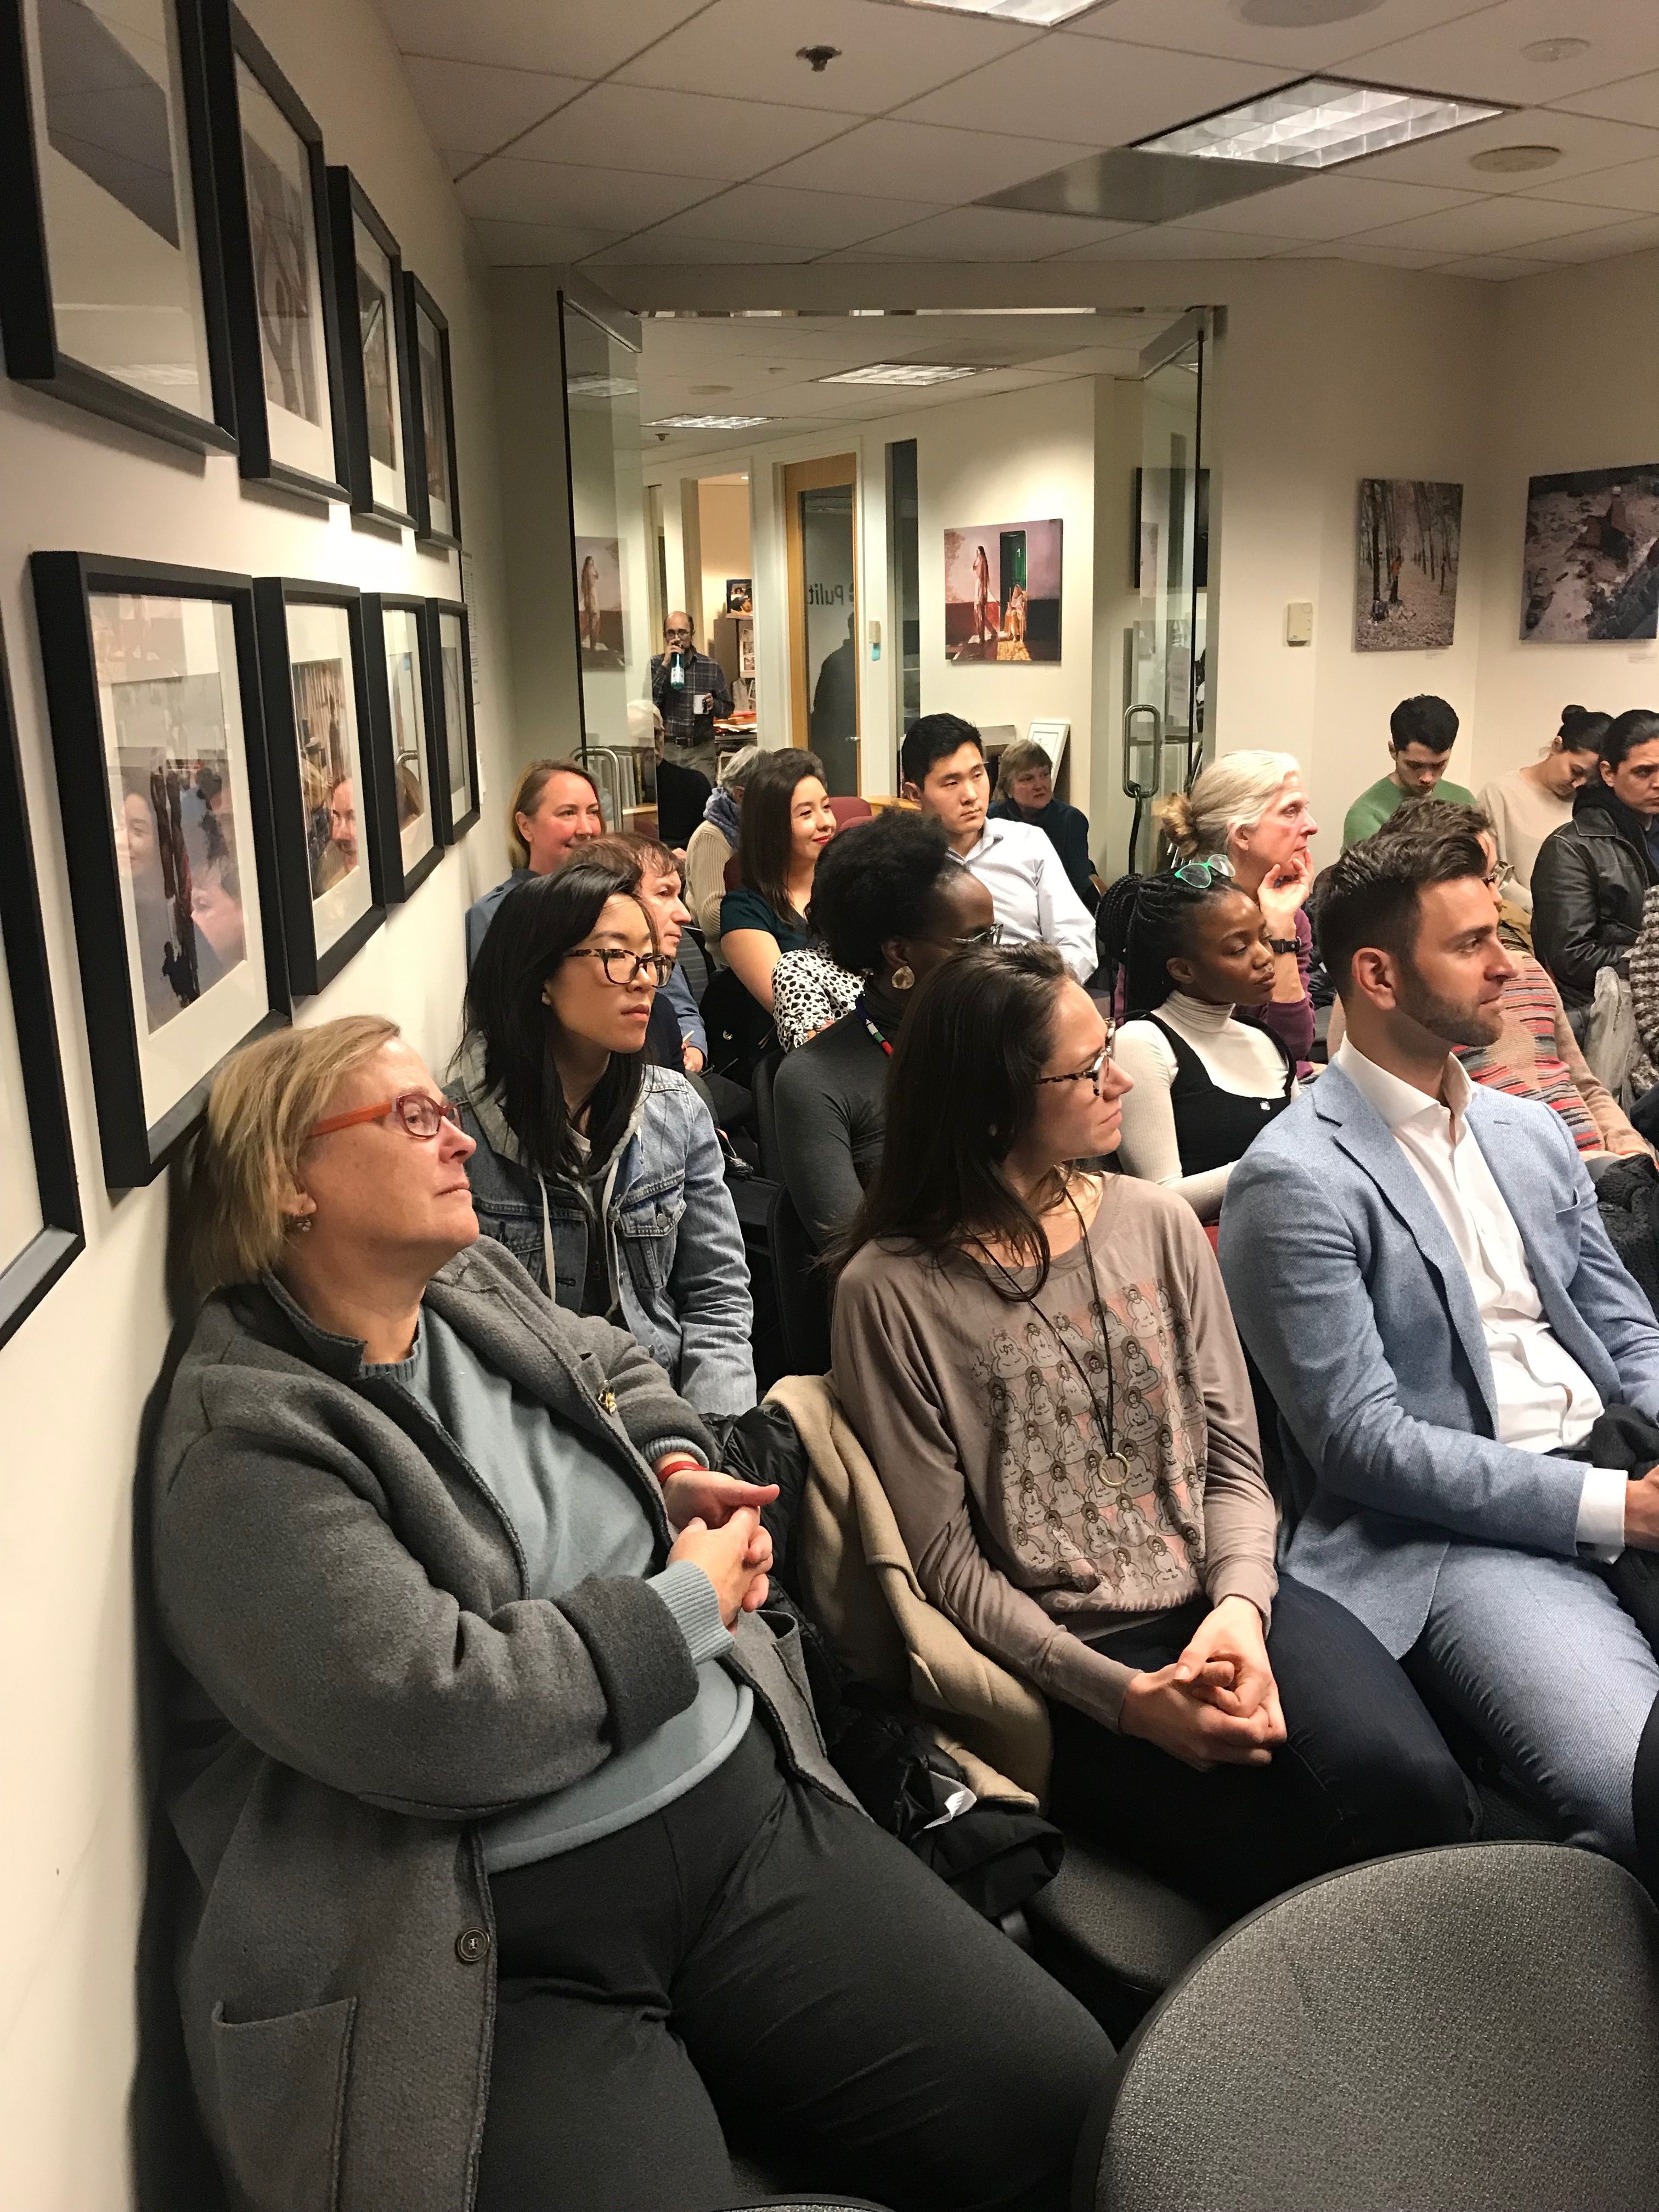 Audience engaged with the panel following the Pulitzer Center's screening of A Table for All. Image by Elana King-Nakaoka. United States, 2019.